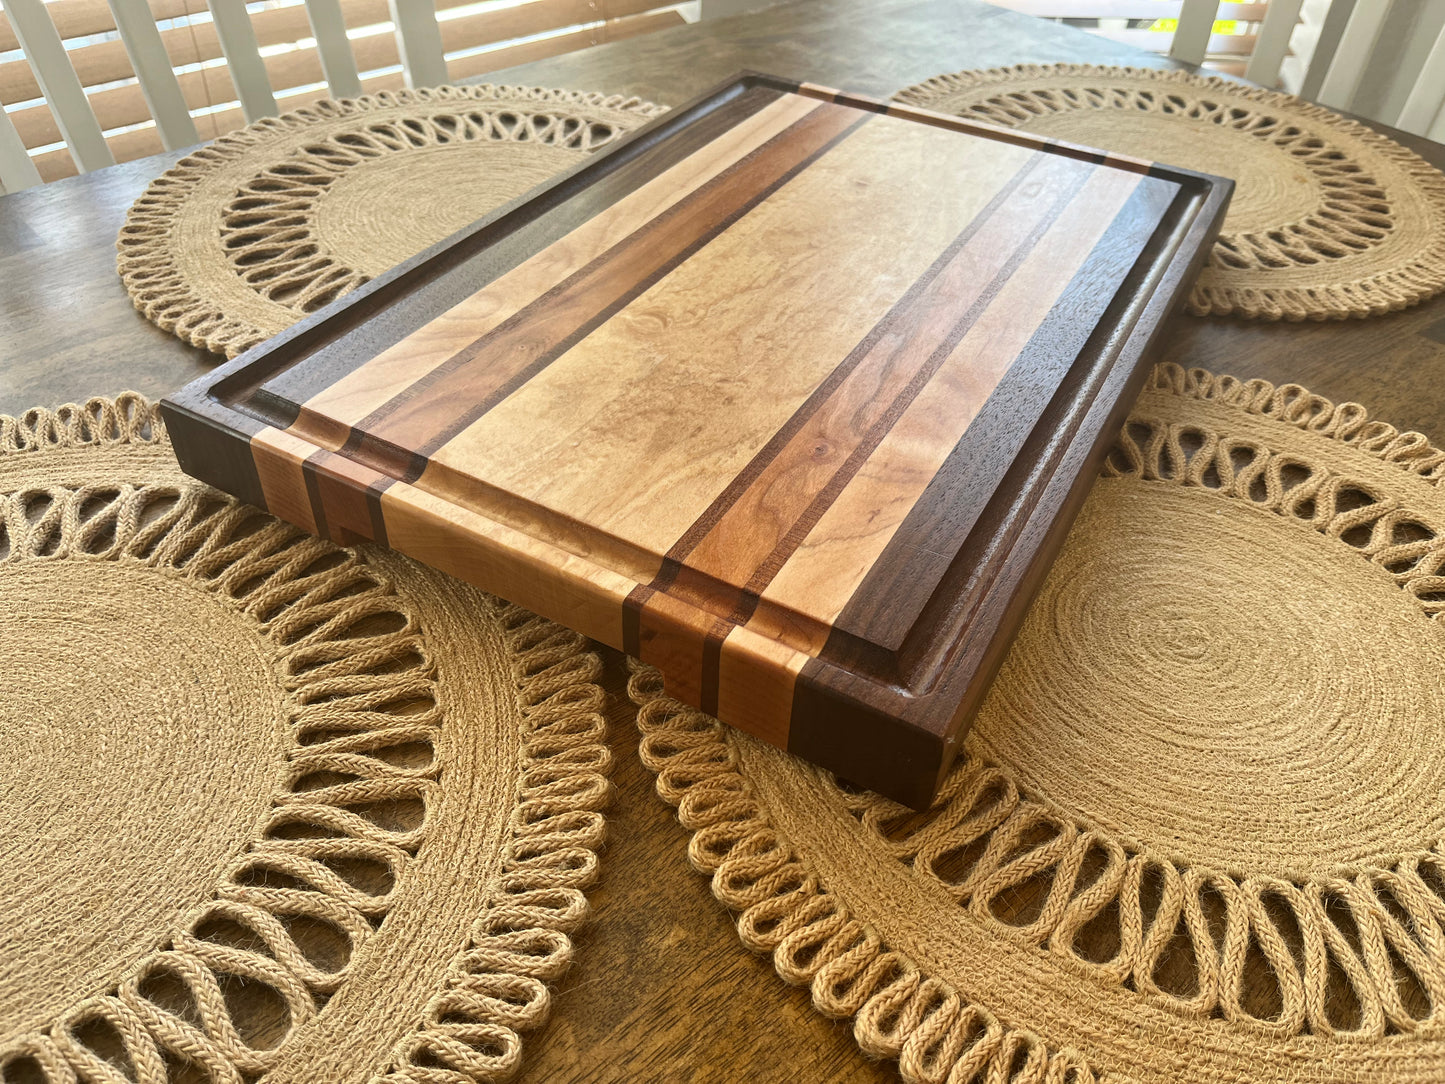 The “Submariner” Cutting Board